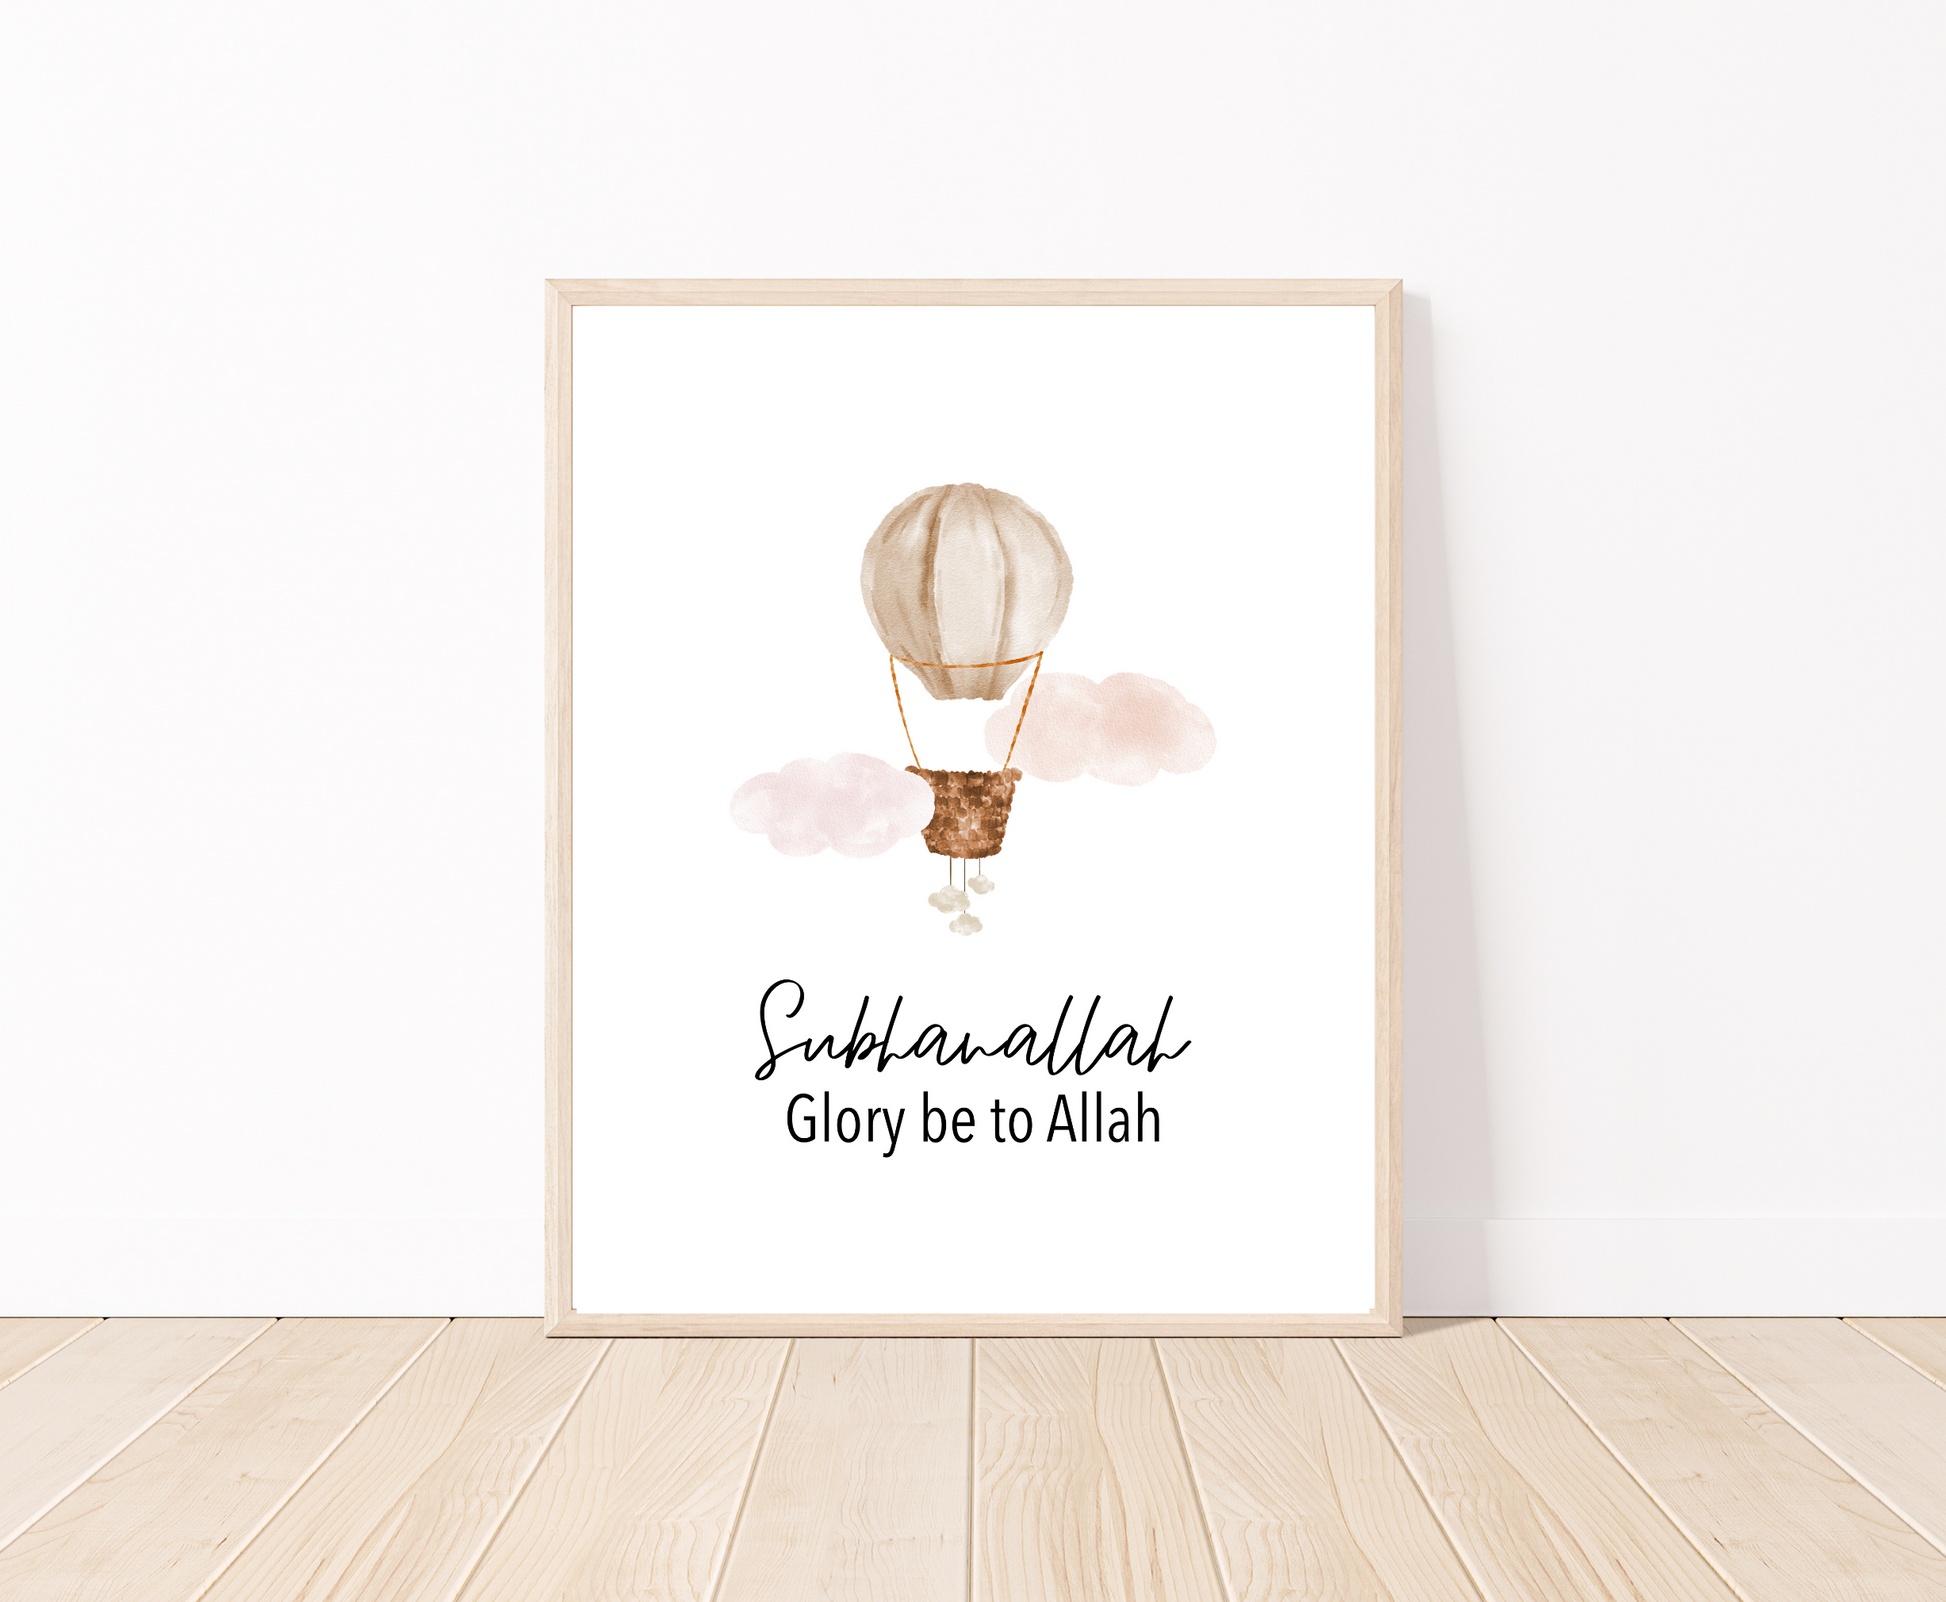 A digital poster that is placed on a white wall and parquet flooring shows a light brown air balloon with two pink clouds and the word “Subhanallah”, Glory Be to Allah, written below.